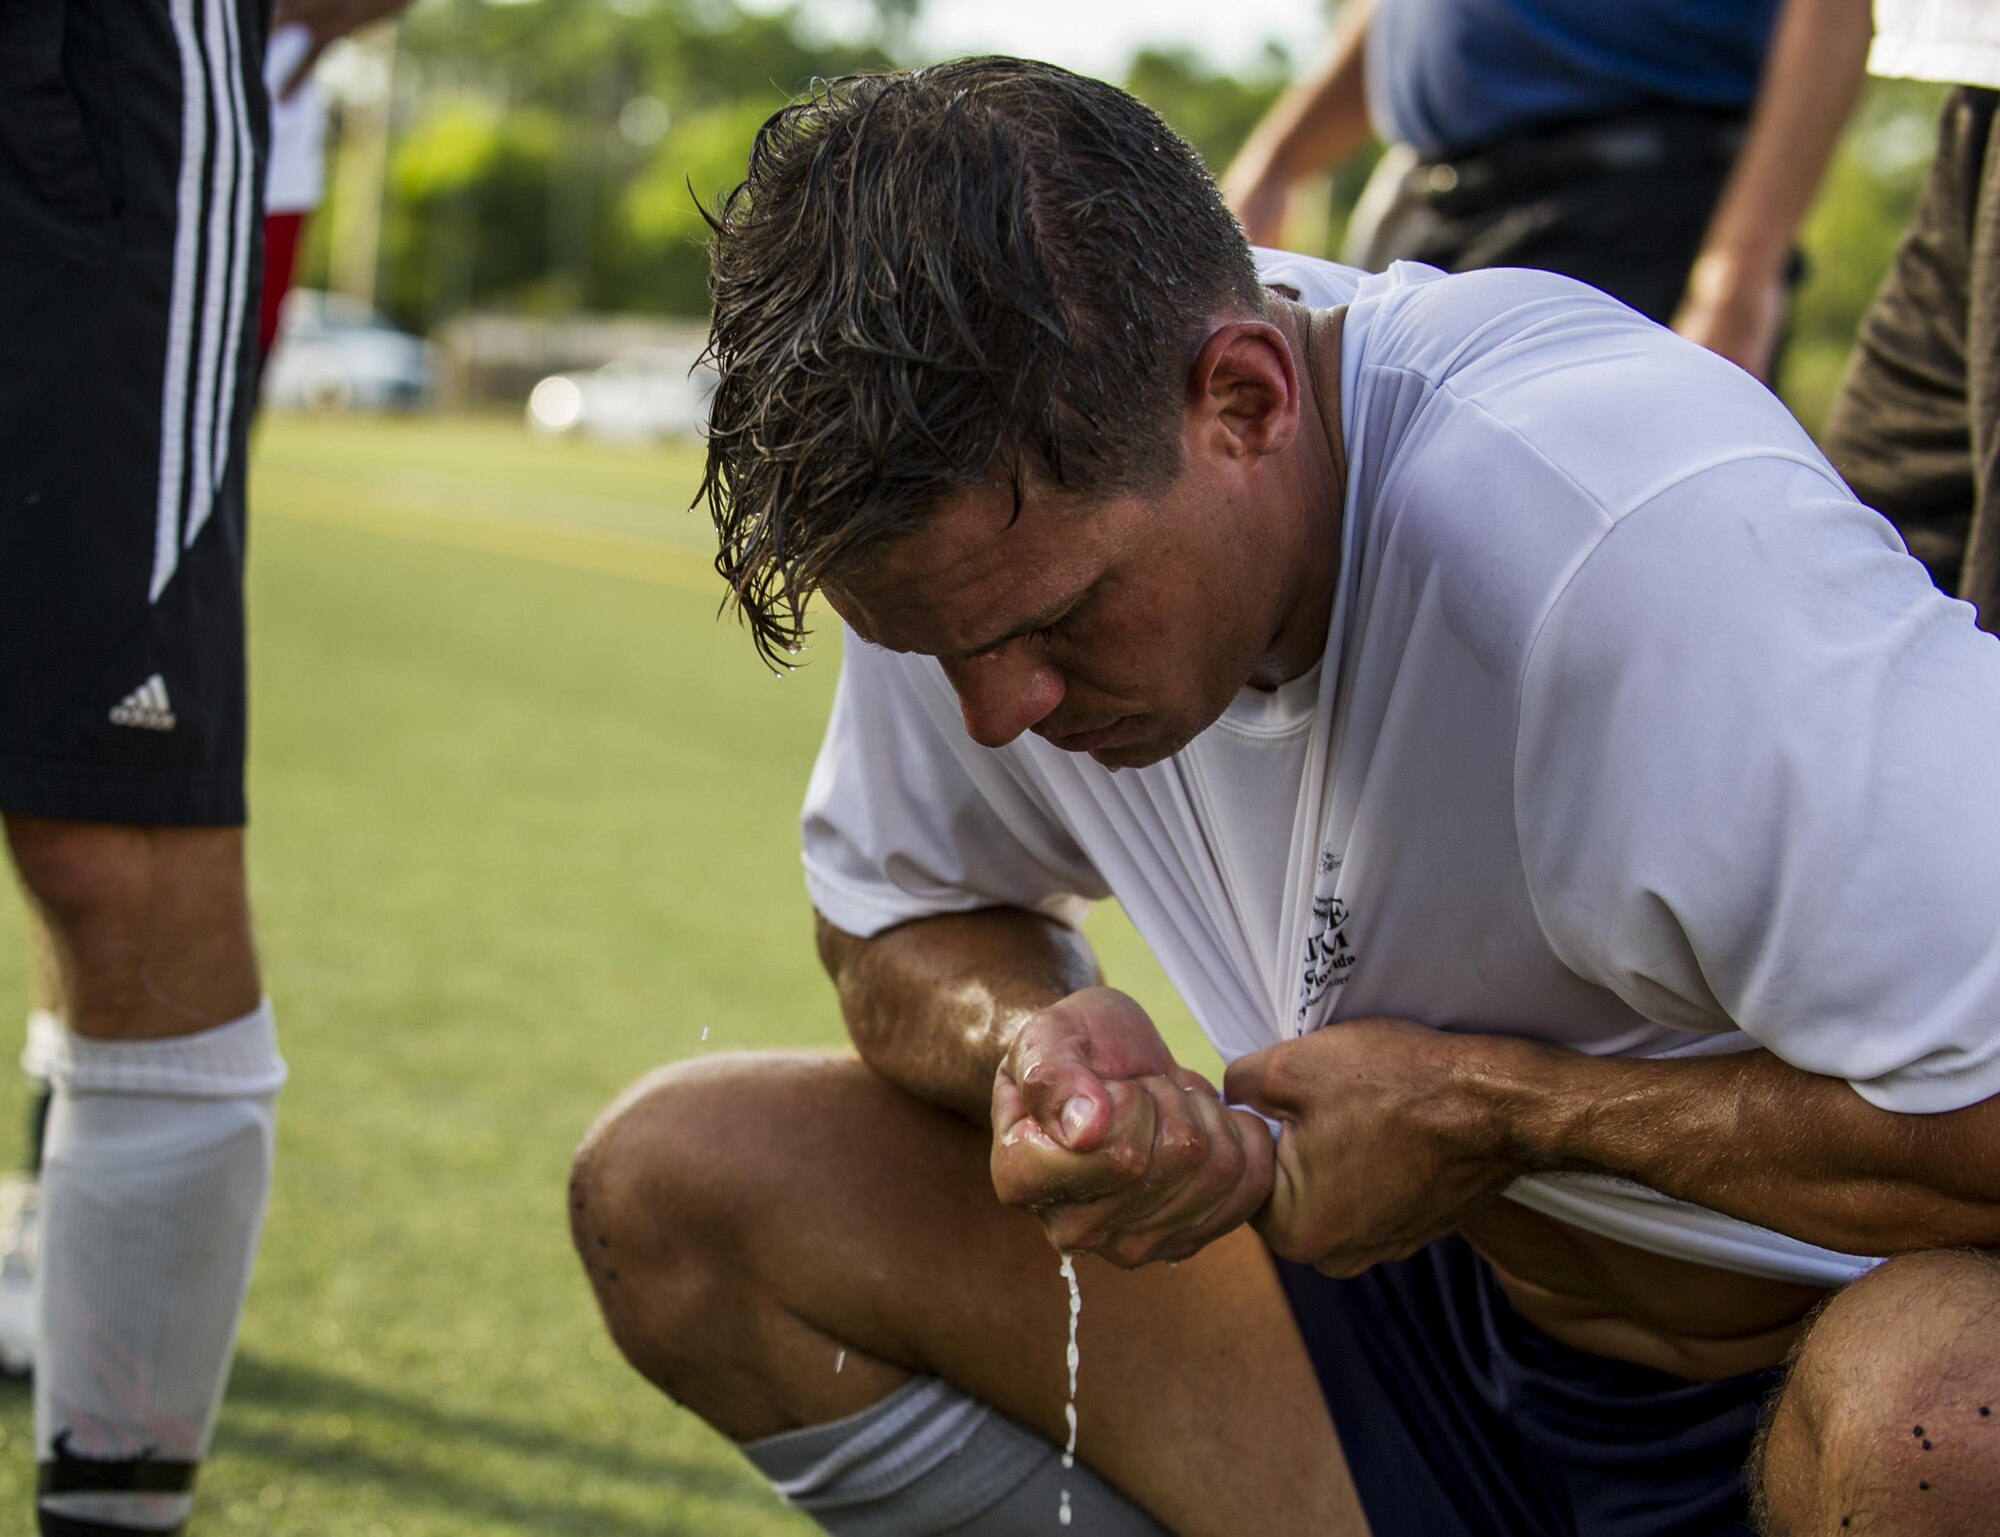 Shawn Winkeler, a member of the 1st Special Operations Medical Group intramural soccer team, wrings out his shirt at halftime during the 2016 Intramural Soccer Championship against the 319th Special Operations Squadron at Hurlburt Field, Fla. Sept. 13, 2016. The 1st SOMDG defeated the 319th SOS in a double-elimination match with a final score of 2-0. (U.S. Air Force photo by Airman 1st Class Isaac O. Guest IV)
